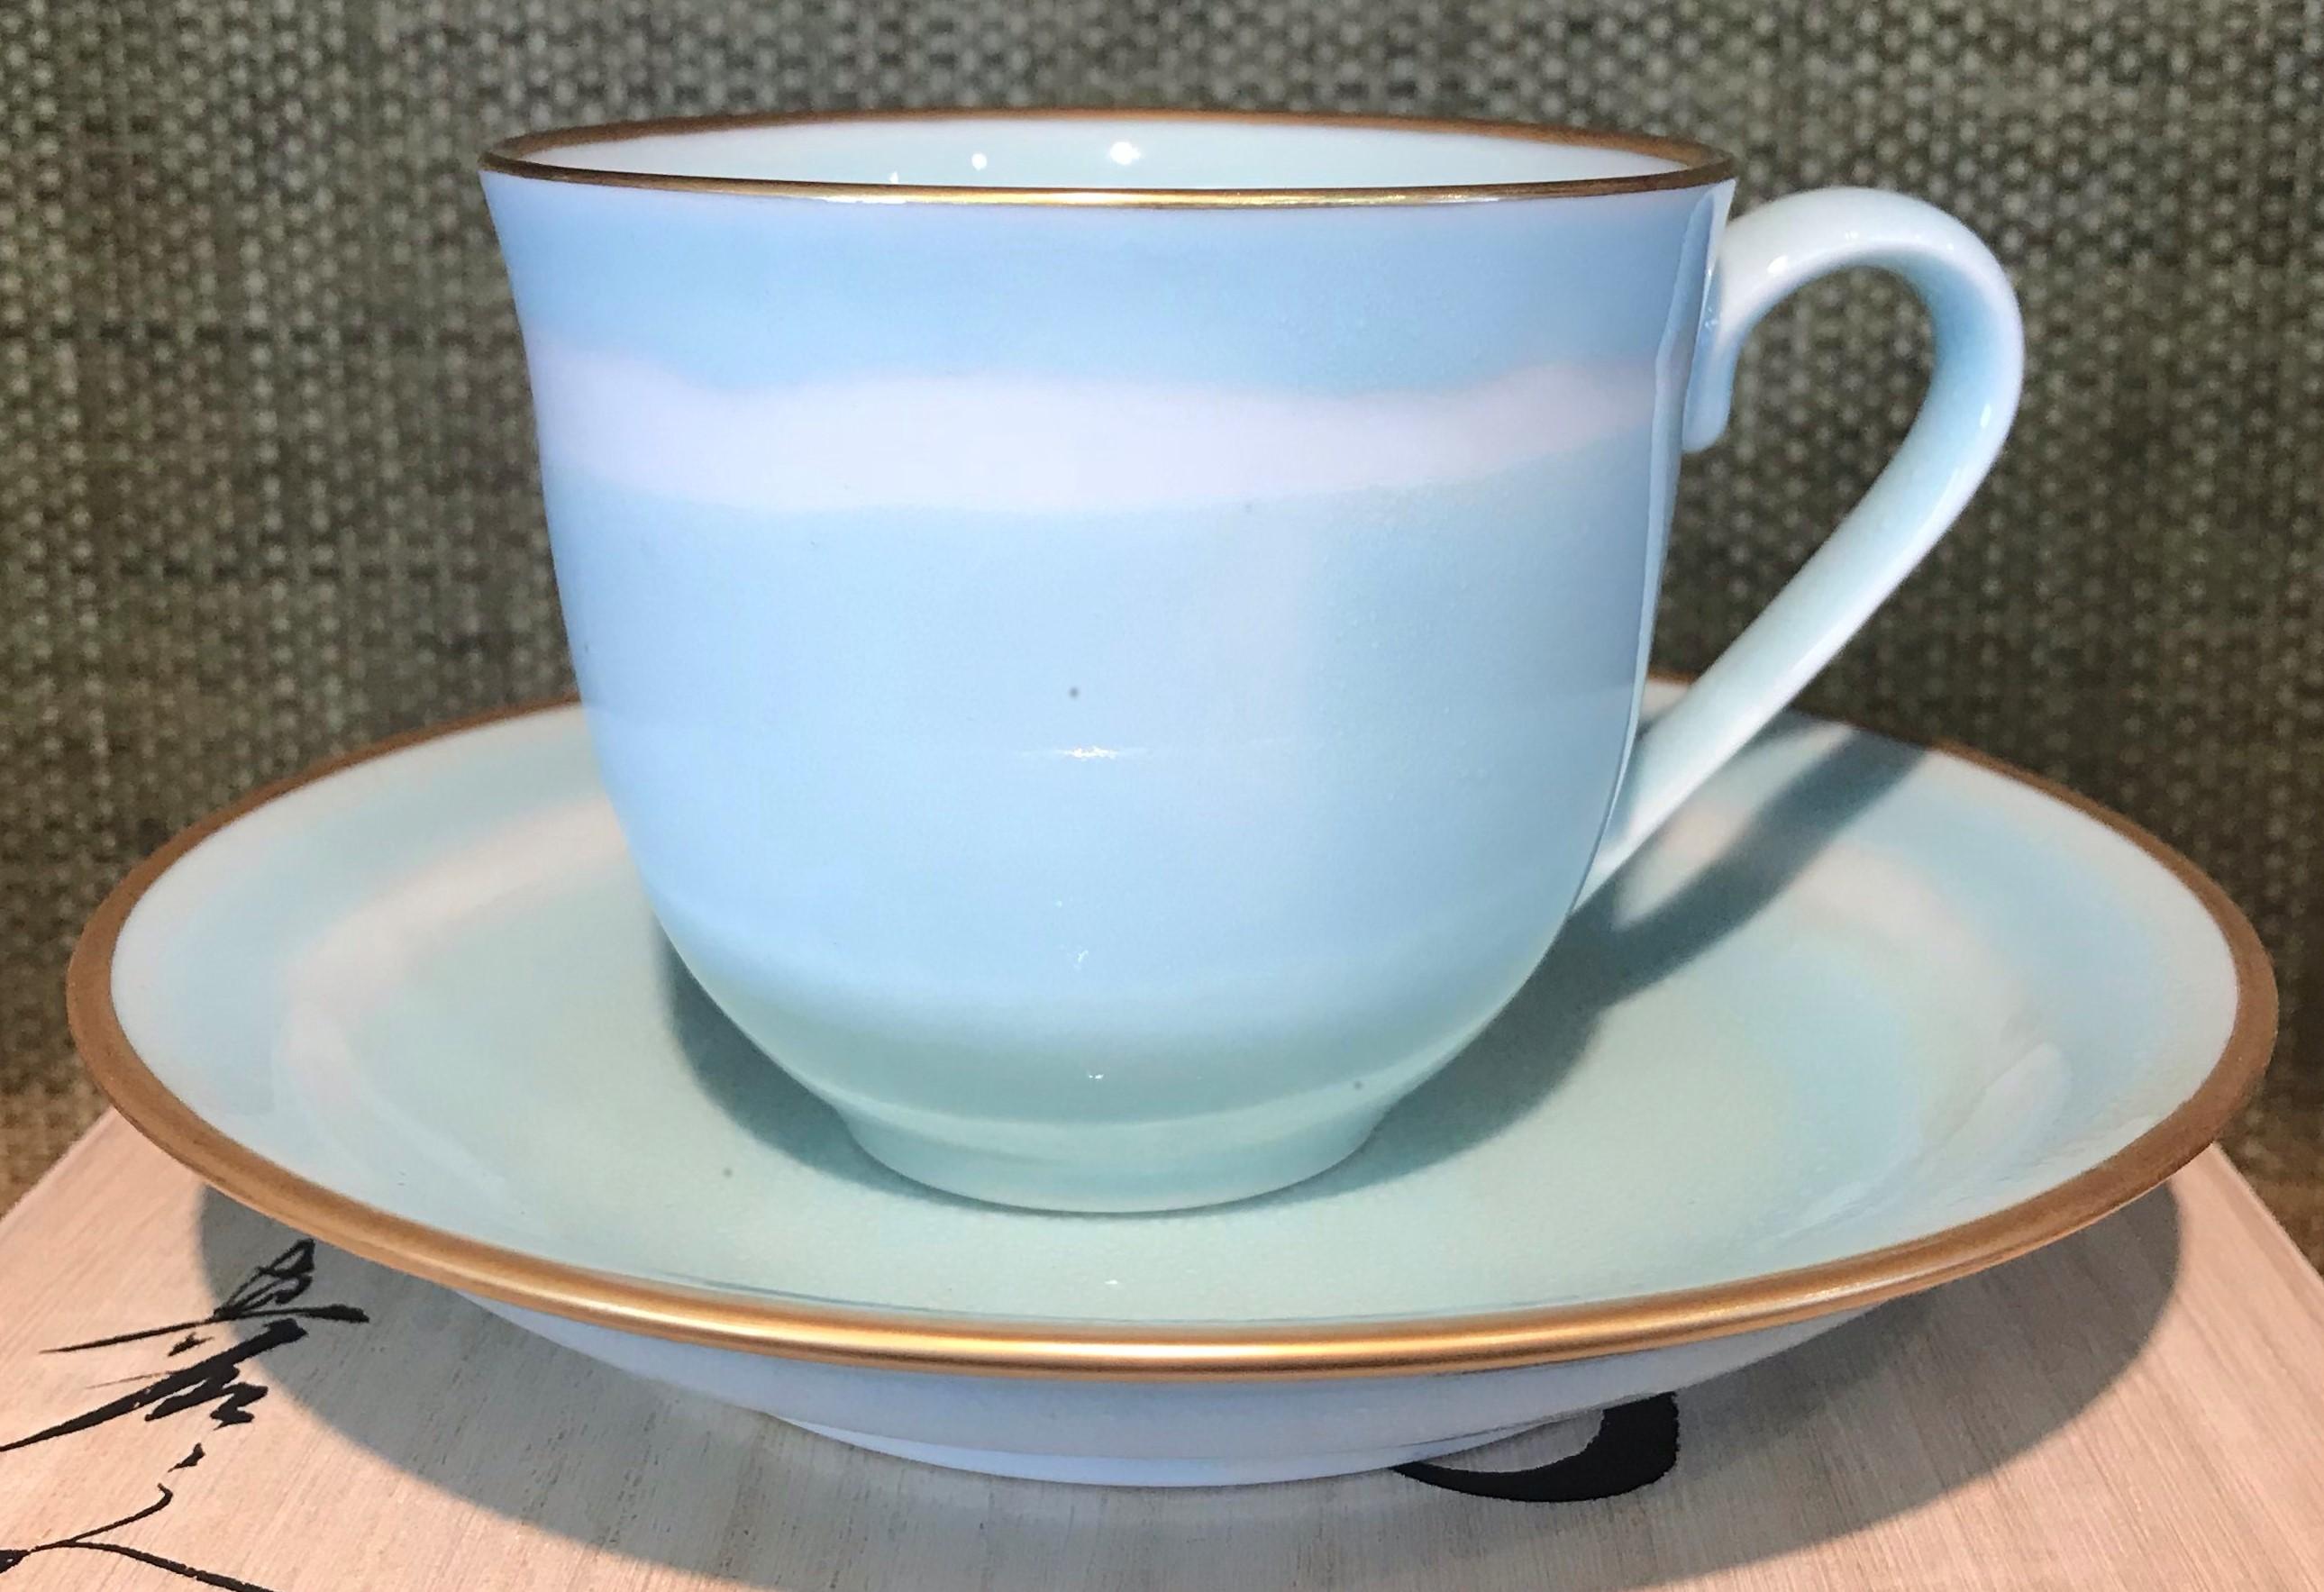 Exceptional Japanese contemporary gilded porcelain cup and saucer, hand-glazed in stunning signature blue on a beautifully shaped body, a signed work from one of the most striking collections by highly acclaimed award-winning master porcelain artist